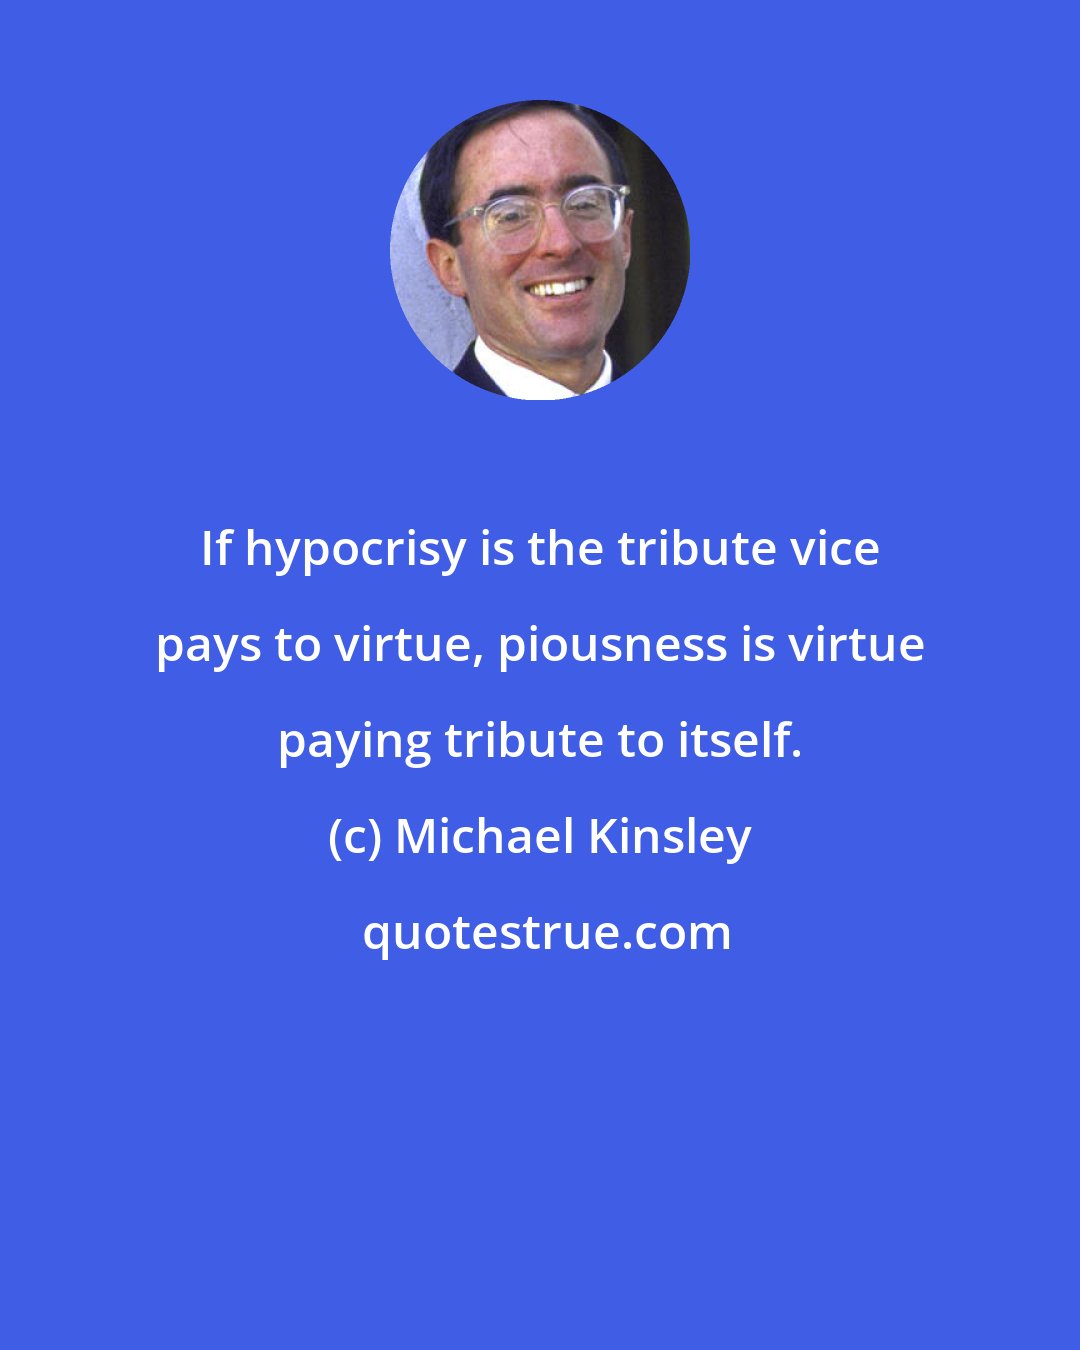 Michael Kinsley: If hypocrisy is the tribute vice pays to virtue, piousness is virtue paying tribute to itself.